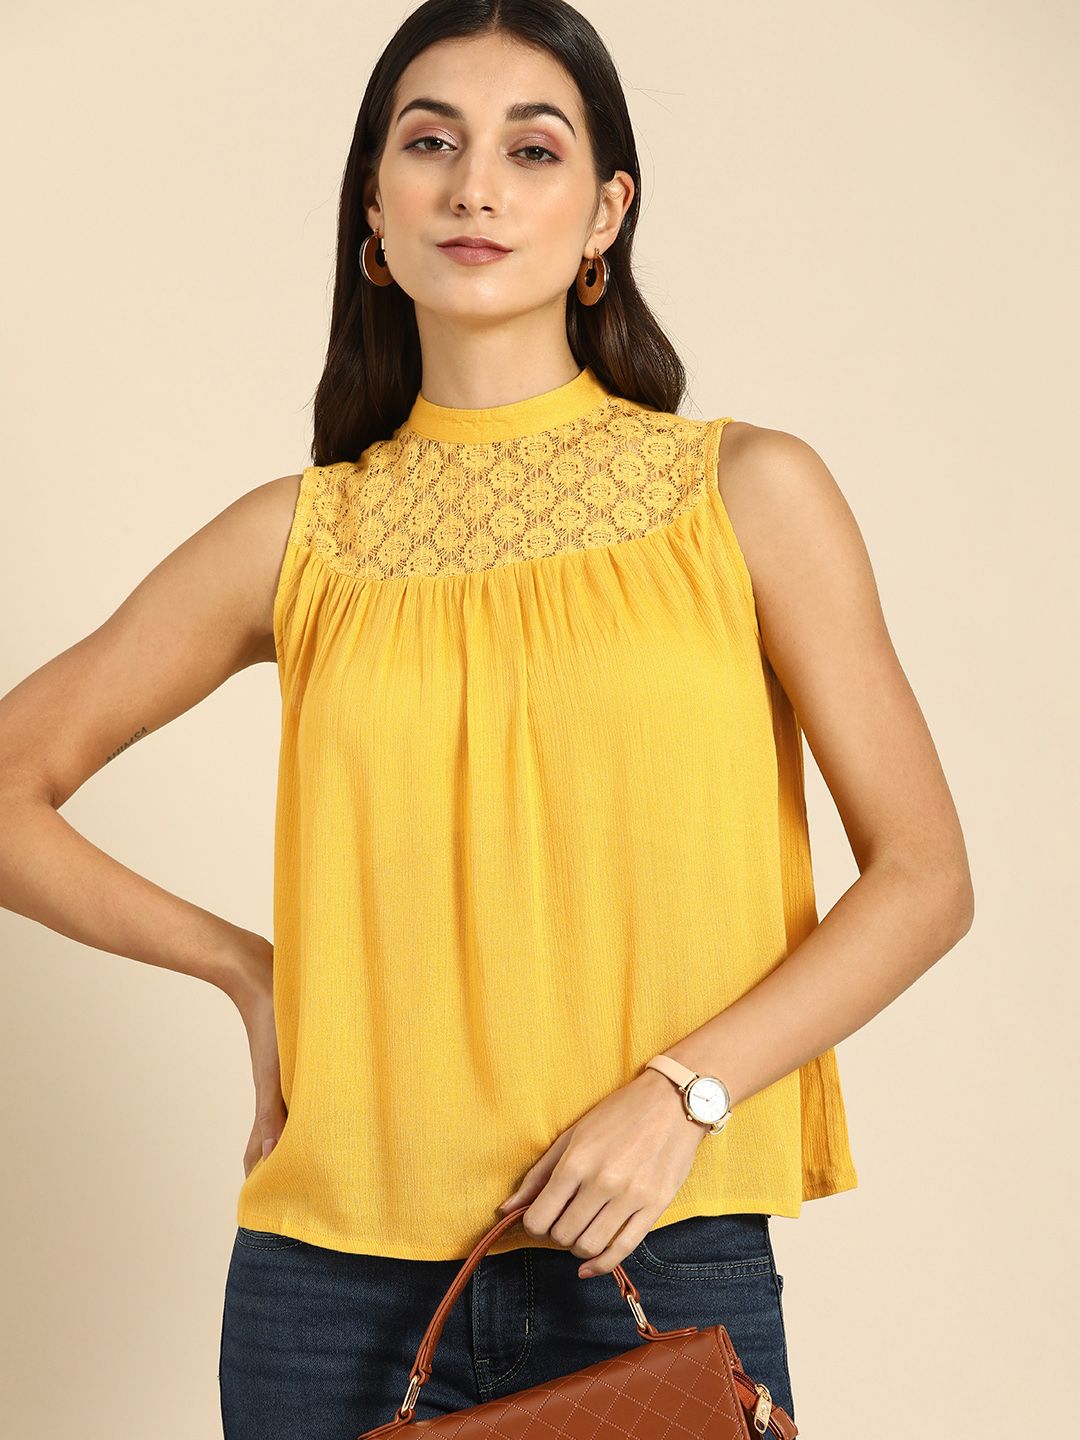 all about you Women Yellow Top with Lace Inserts Price in India